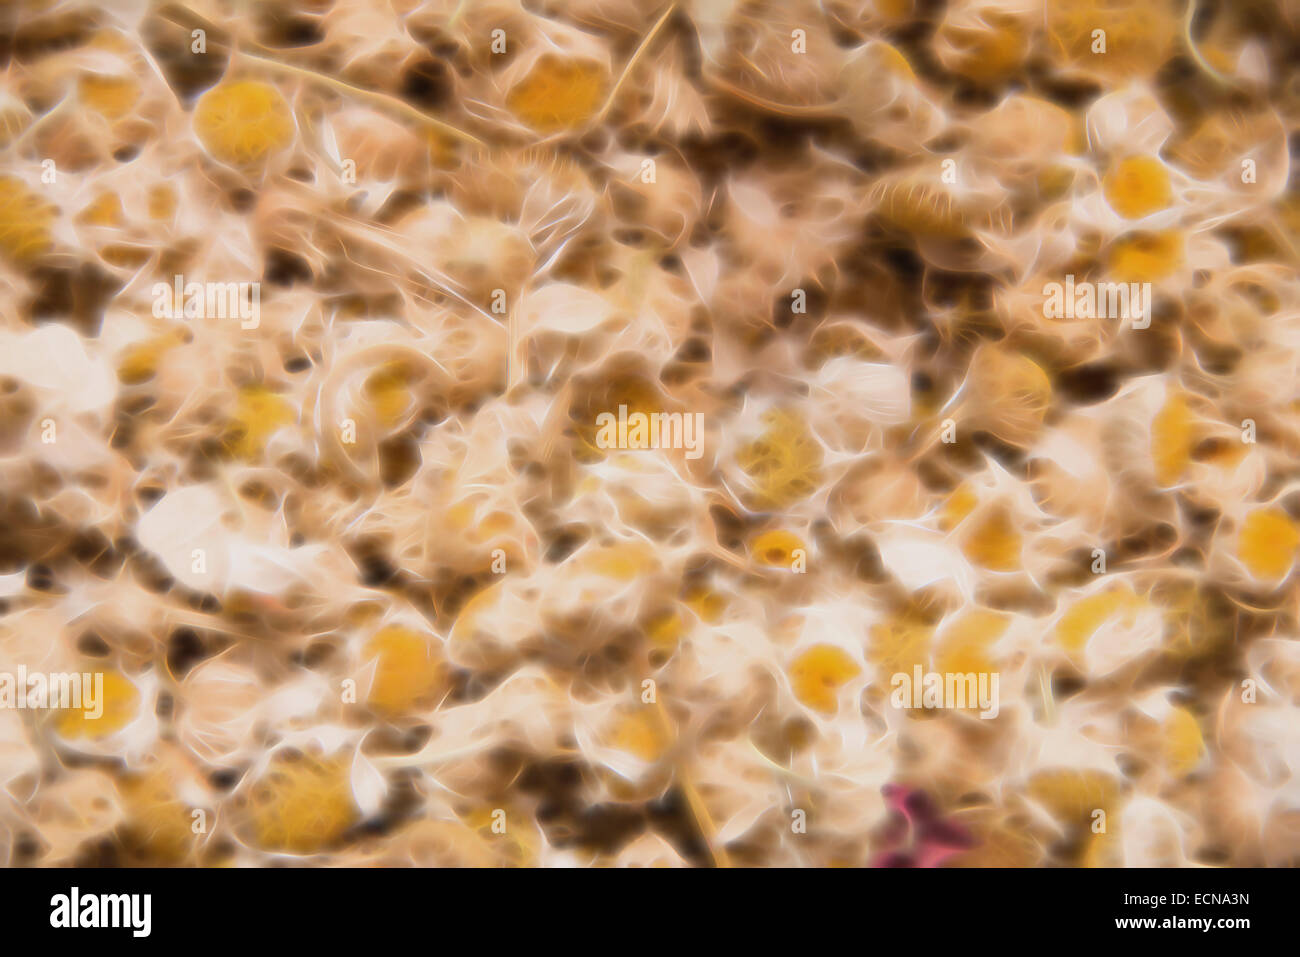 Soft abstract background image from a base image of dried flowers Stock Photo